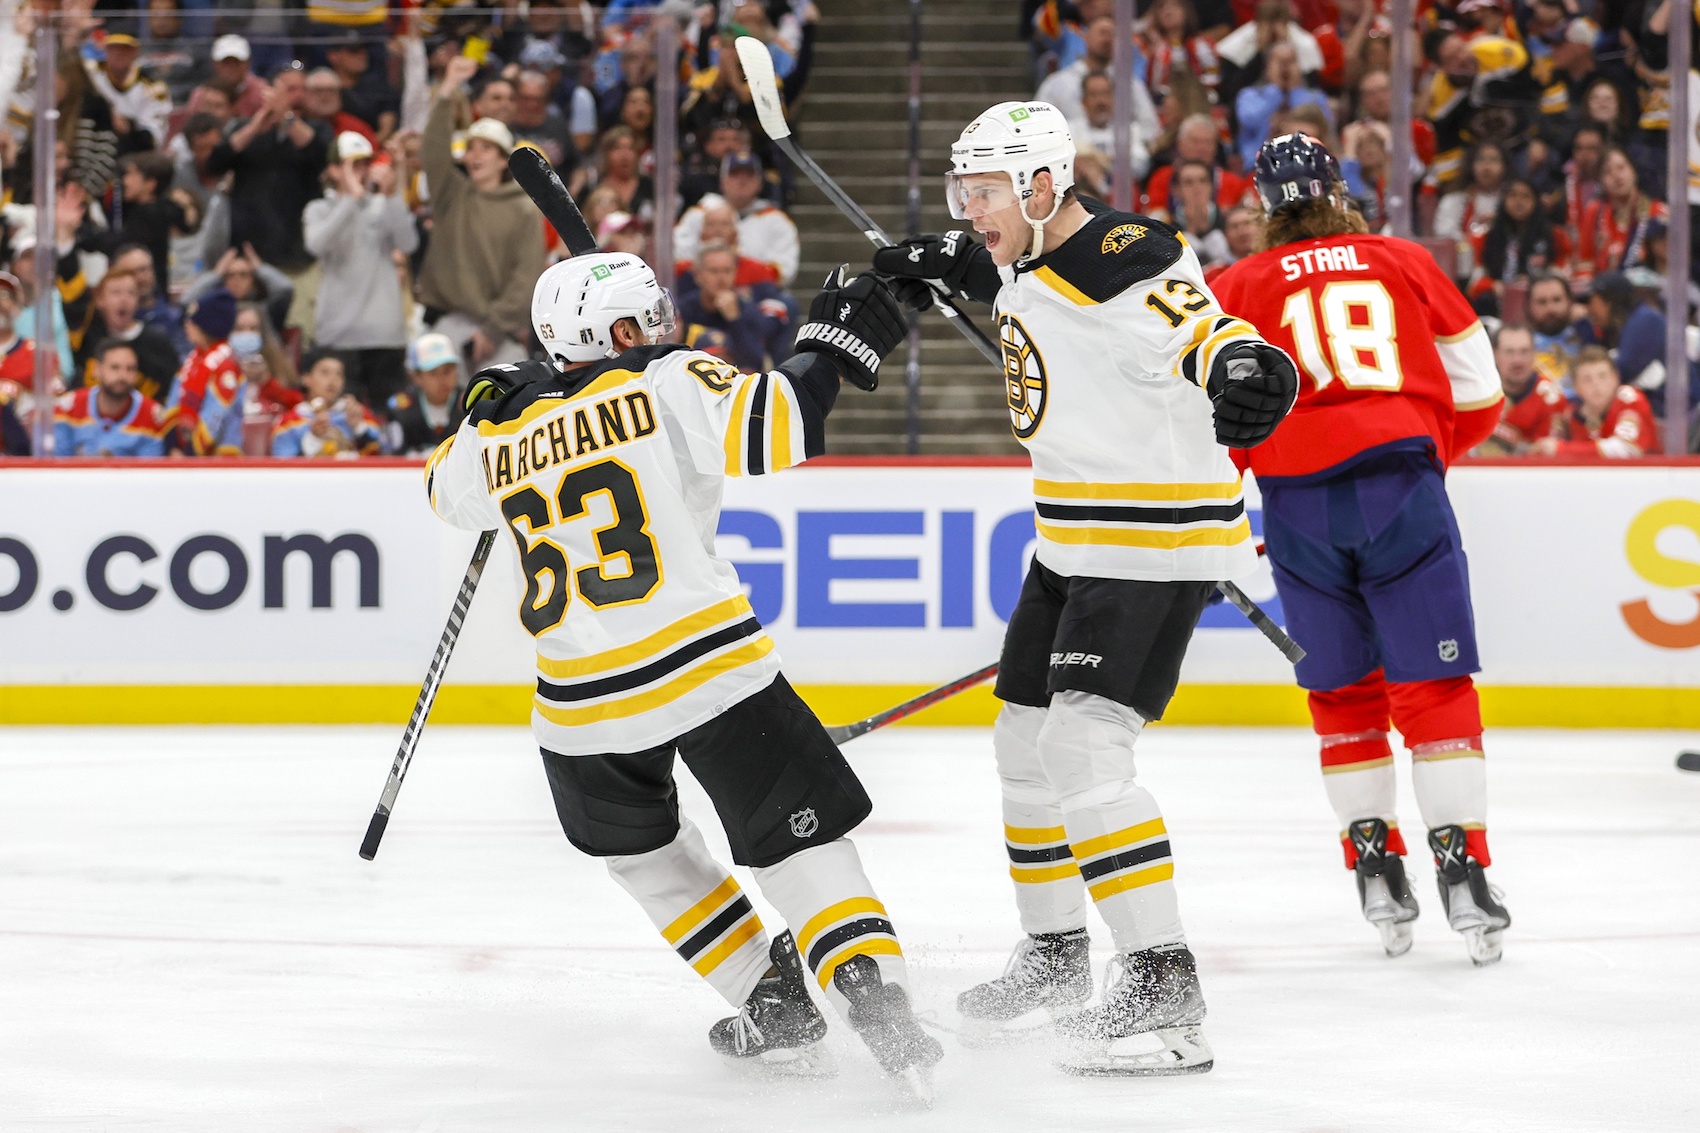 Apr 21, 2023; Sunrise, Florida, USA; Boston Bruins center Charlie Coyle (13) celebrates with left wing Brad Marchand (63) after scoring during the second period against the Florida Panthers in game three of the first round of the 2023 Stanley Cup Playoffs at FLA Live Arena. Mandatory Credit: Sam Navarro-USA TODAY Sports